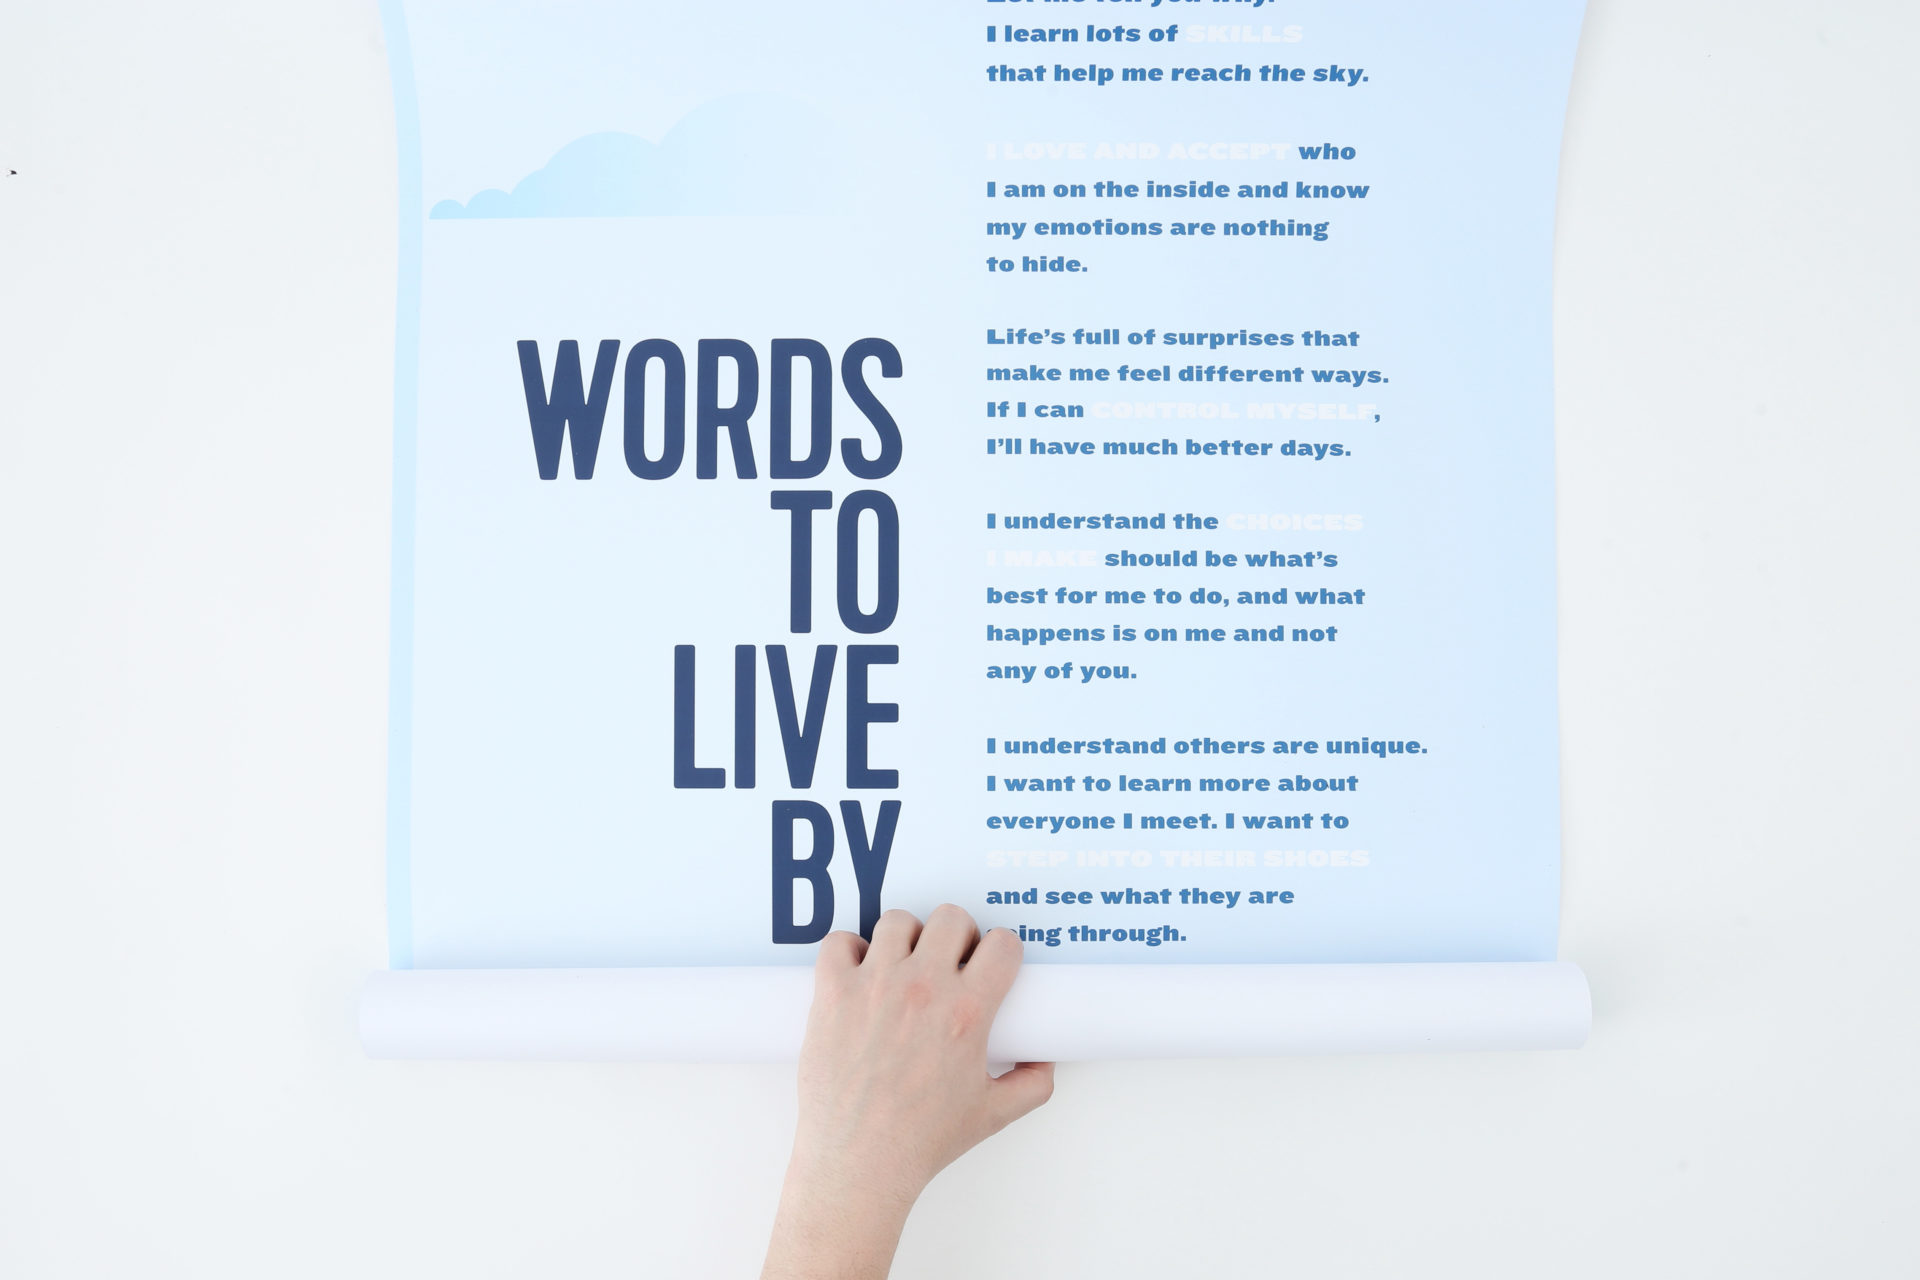 A marketing poster printed with Words to Live By and a hand unrolling the bottom.